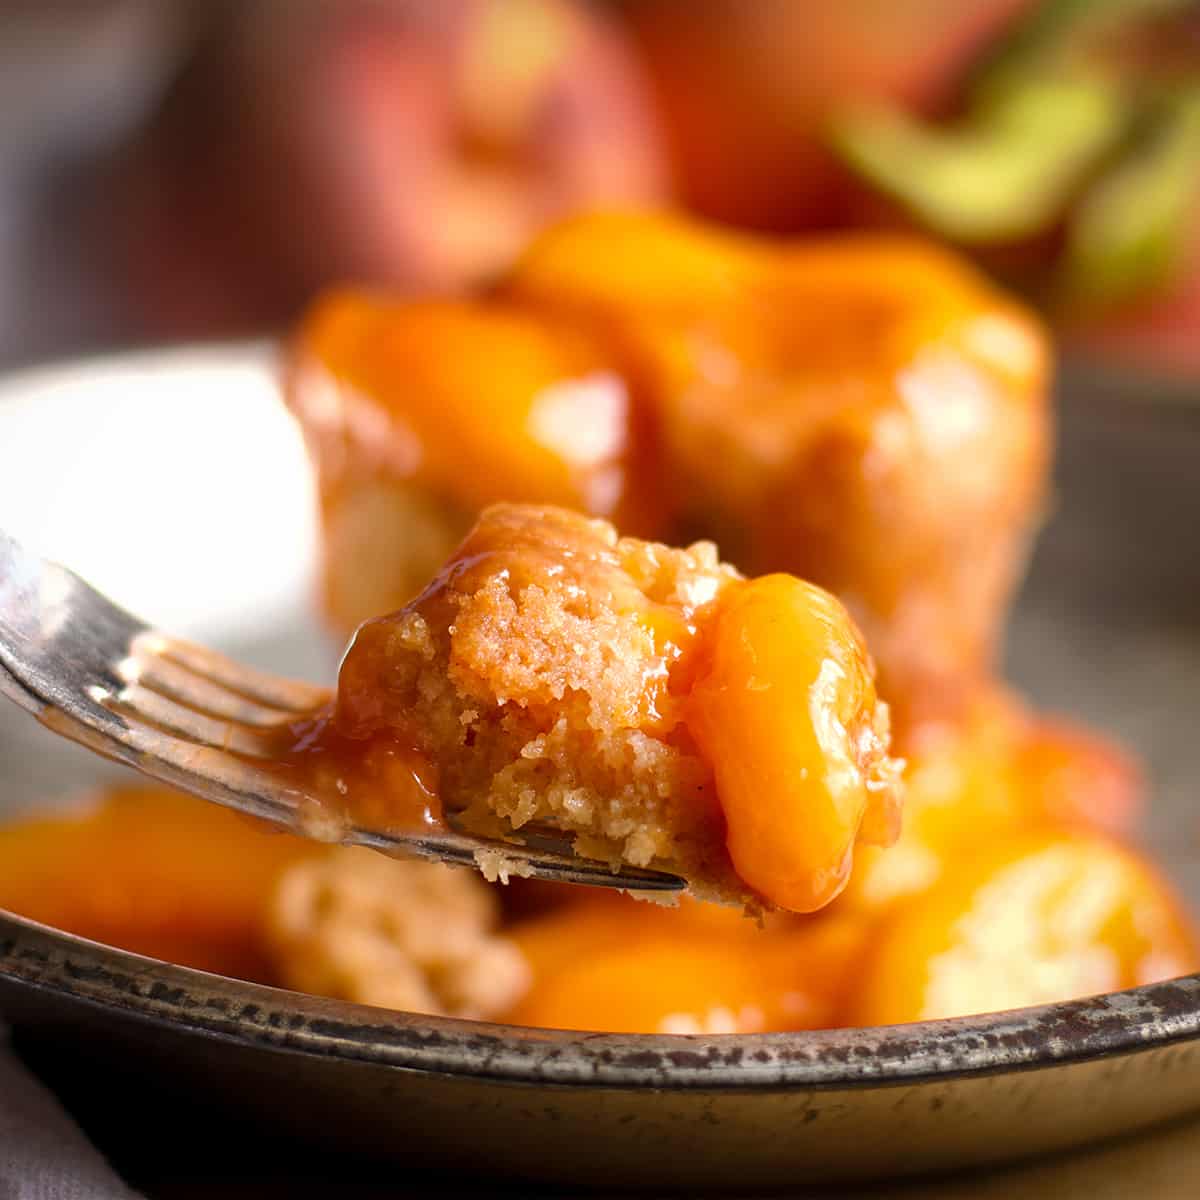 Someone using a fork to take a bite of a peach cobbler muffin smothered in peach sauce.